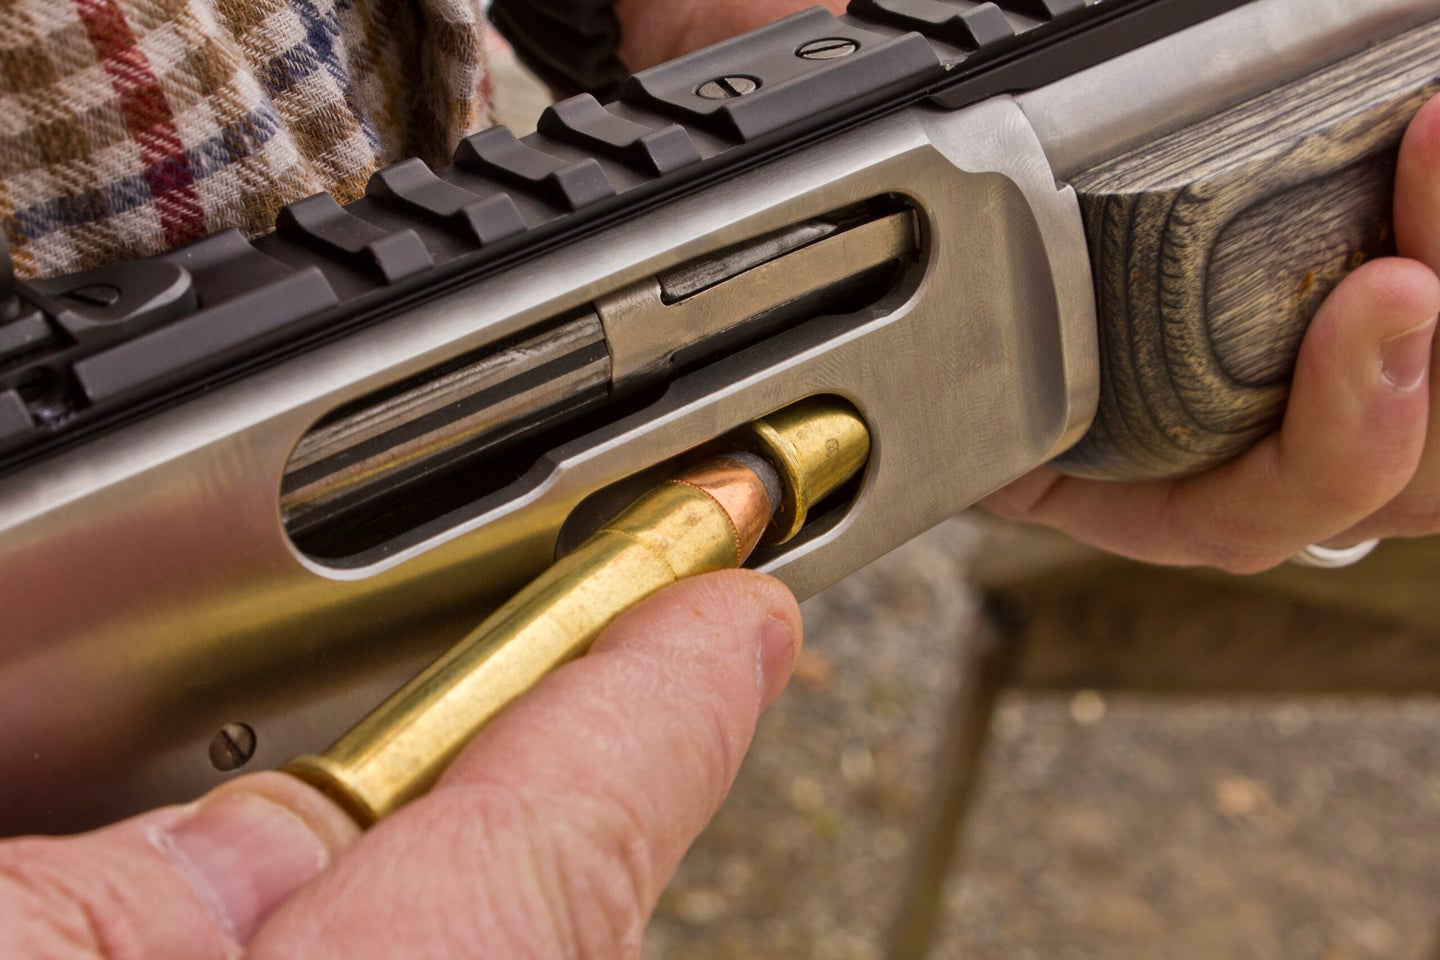 Loading a cartridge into a lever-action rifle.